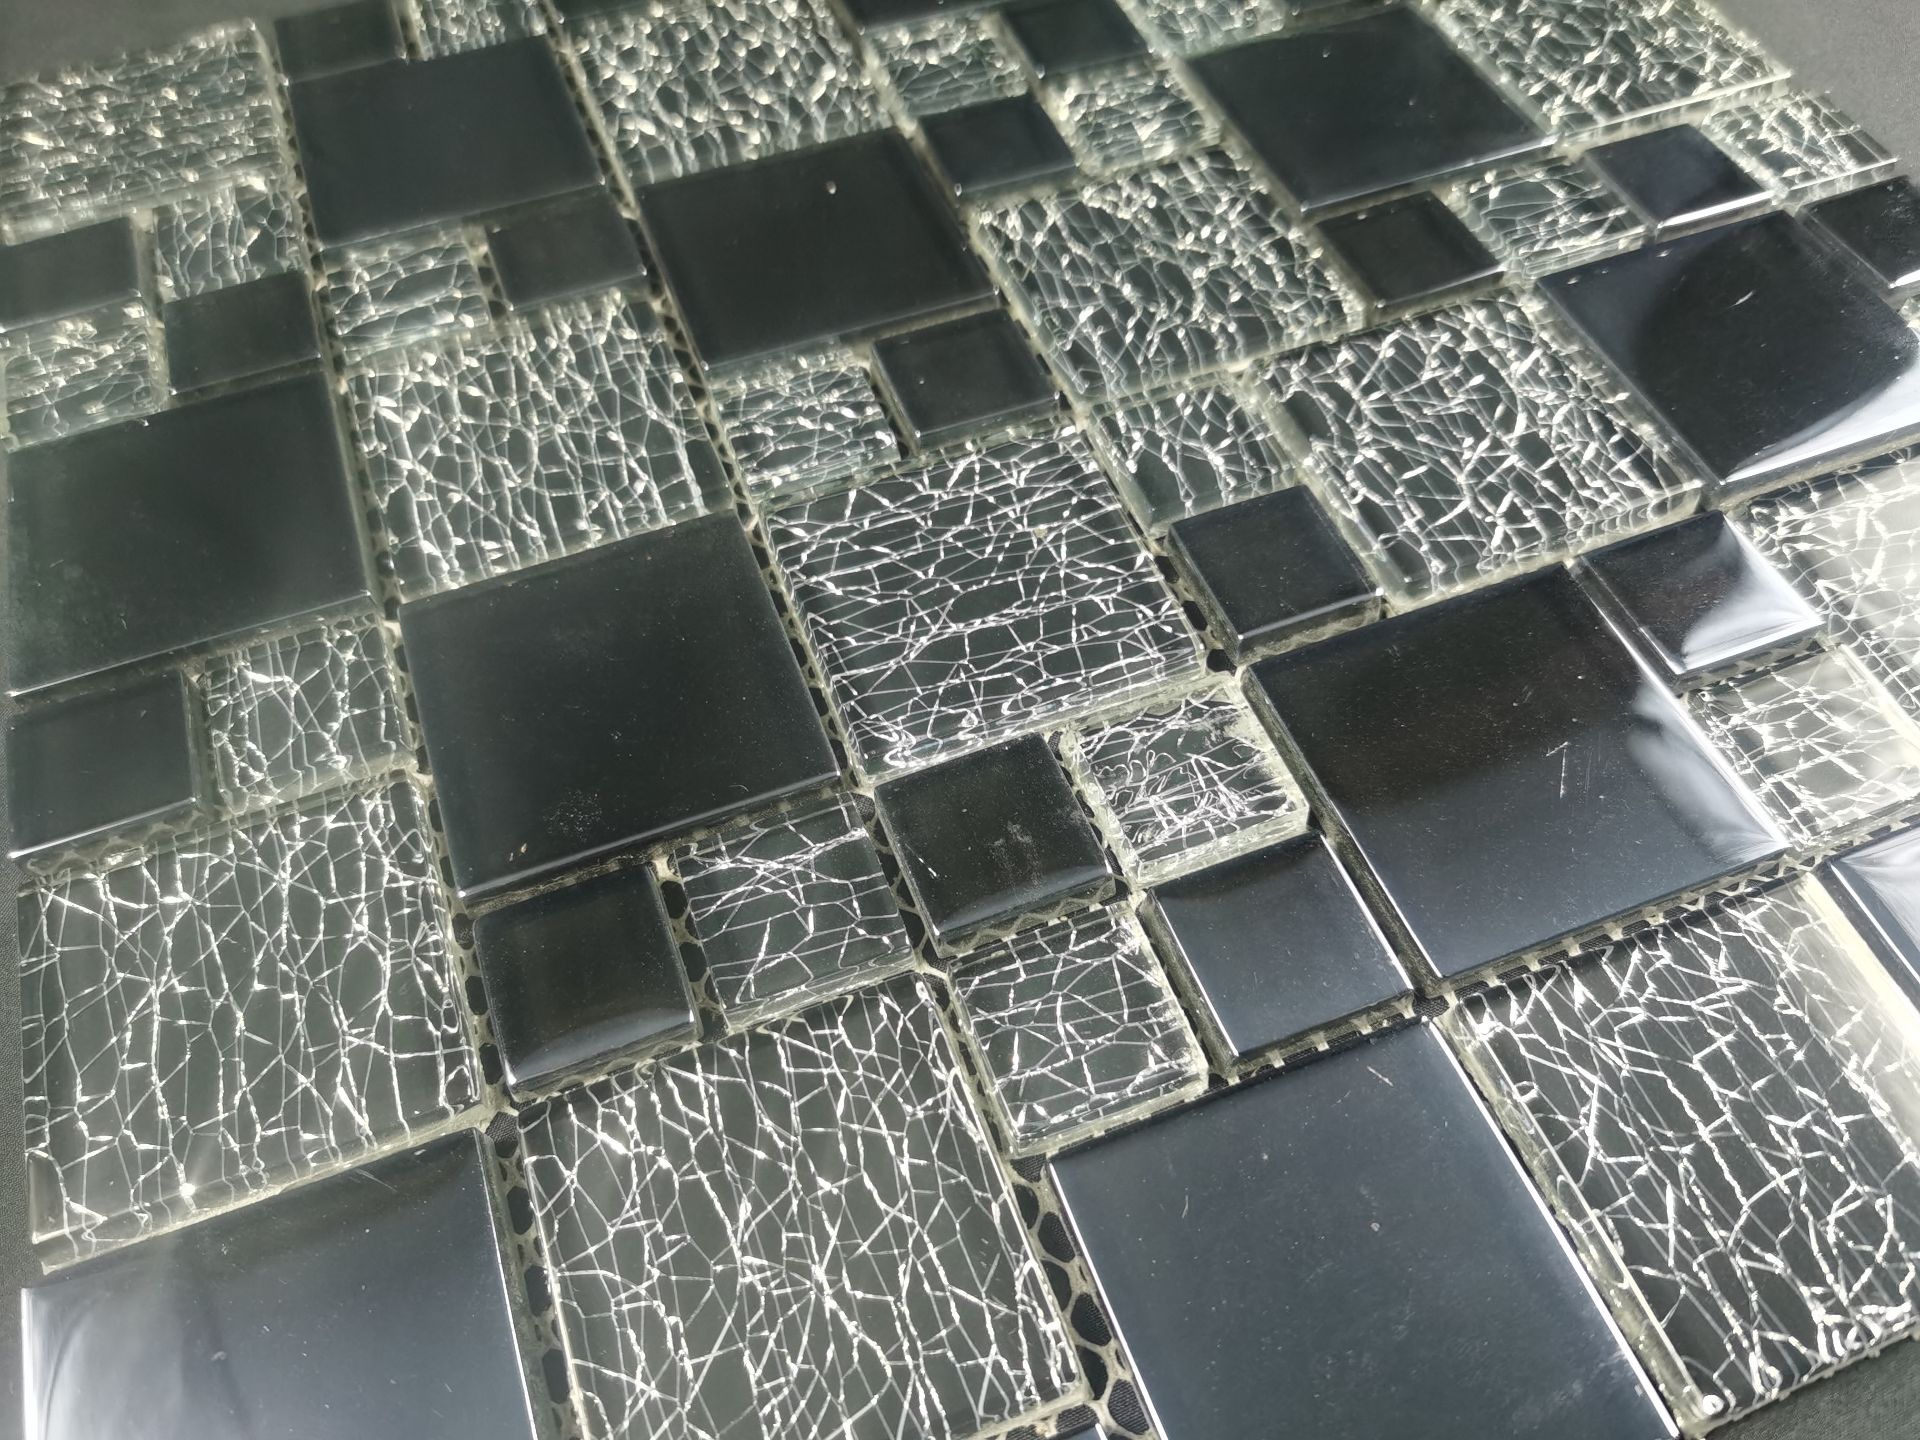 5 Square Metres - High Quality Glass/Stainless Steel Mosaic Tiles-55 sheets - Image 3 of 5